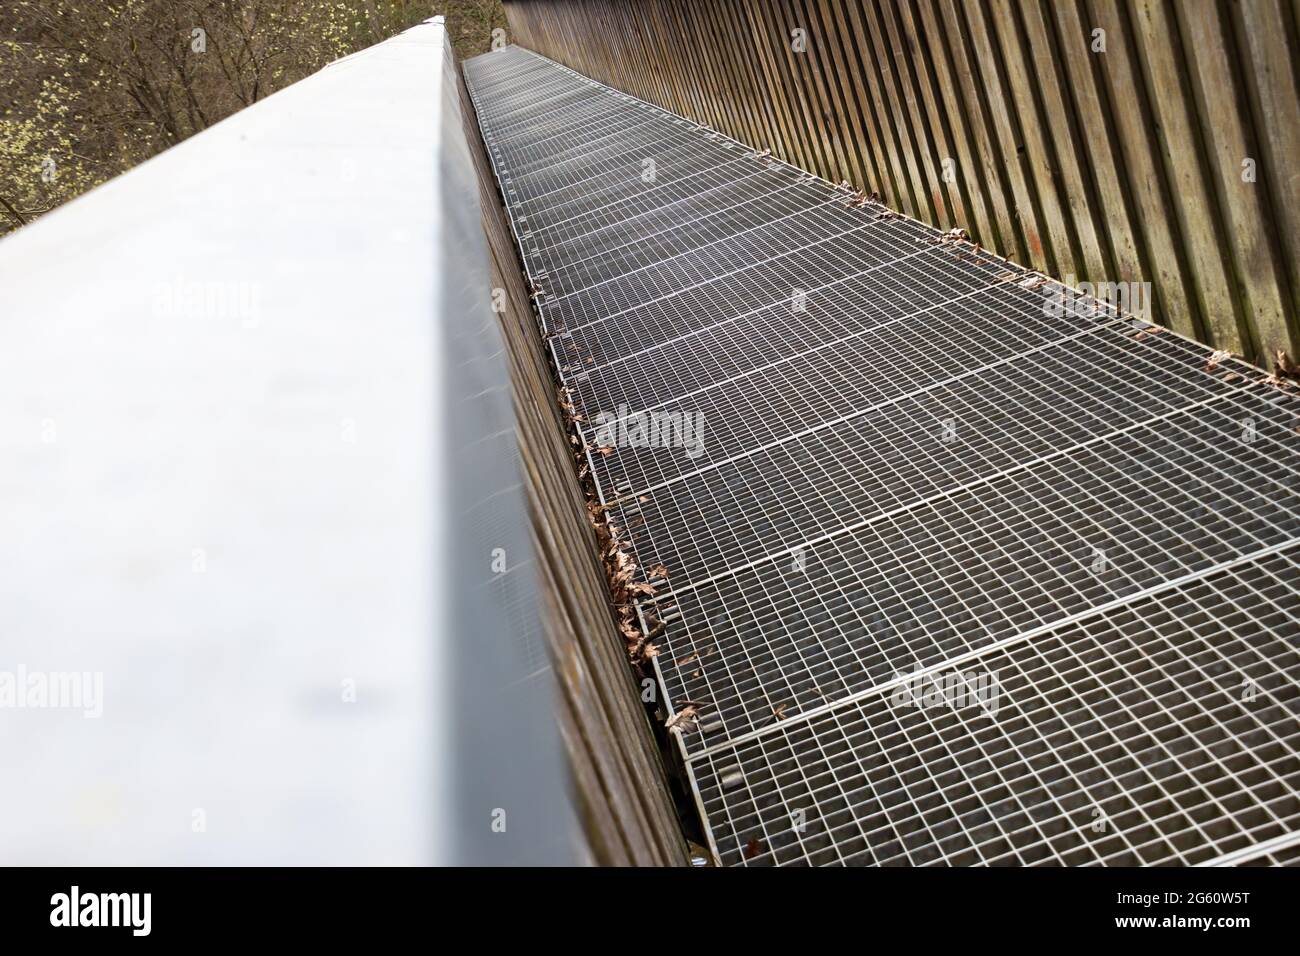 Footbridge with iron grating floor and wooden railing crossing a river Stock Photo